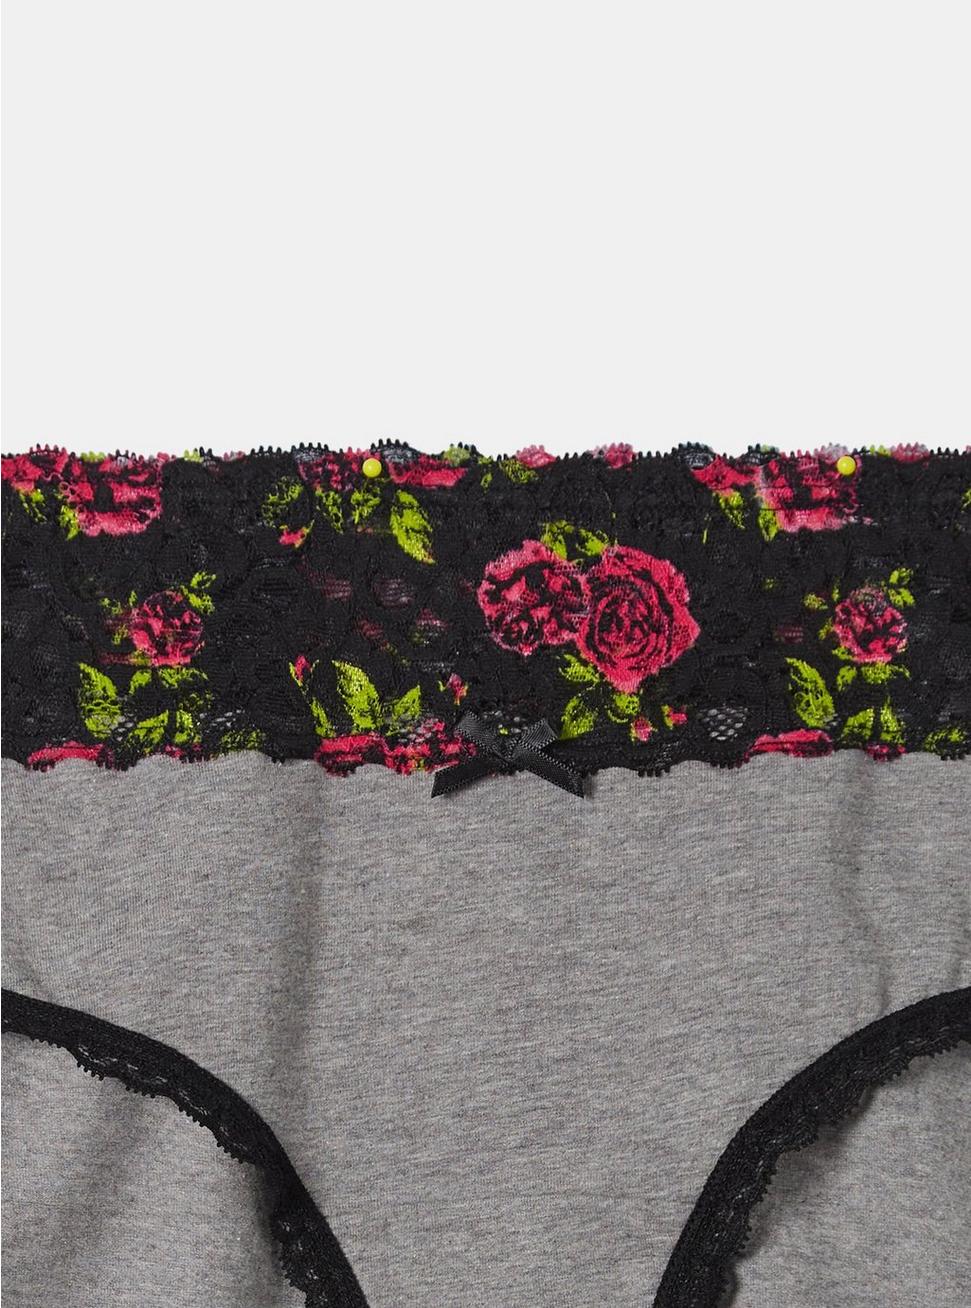 Cotton Mid Rise Hipster Lace Panty, HEATHER GREY BRUSHED ROSES FLORAL, alternate